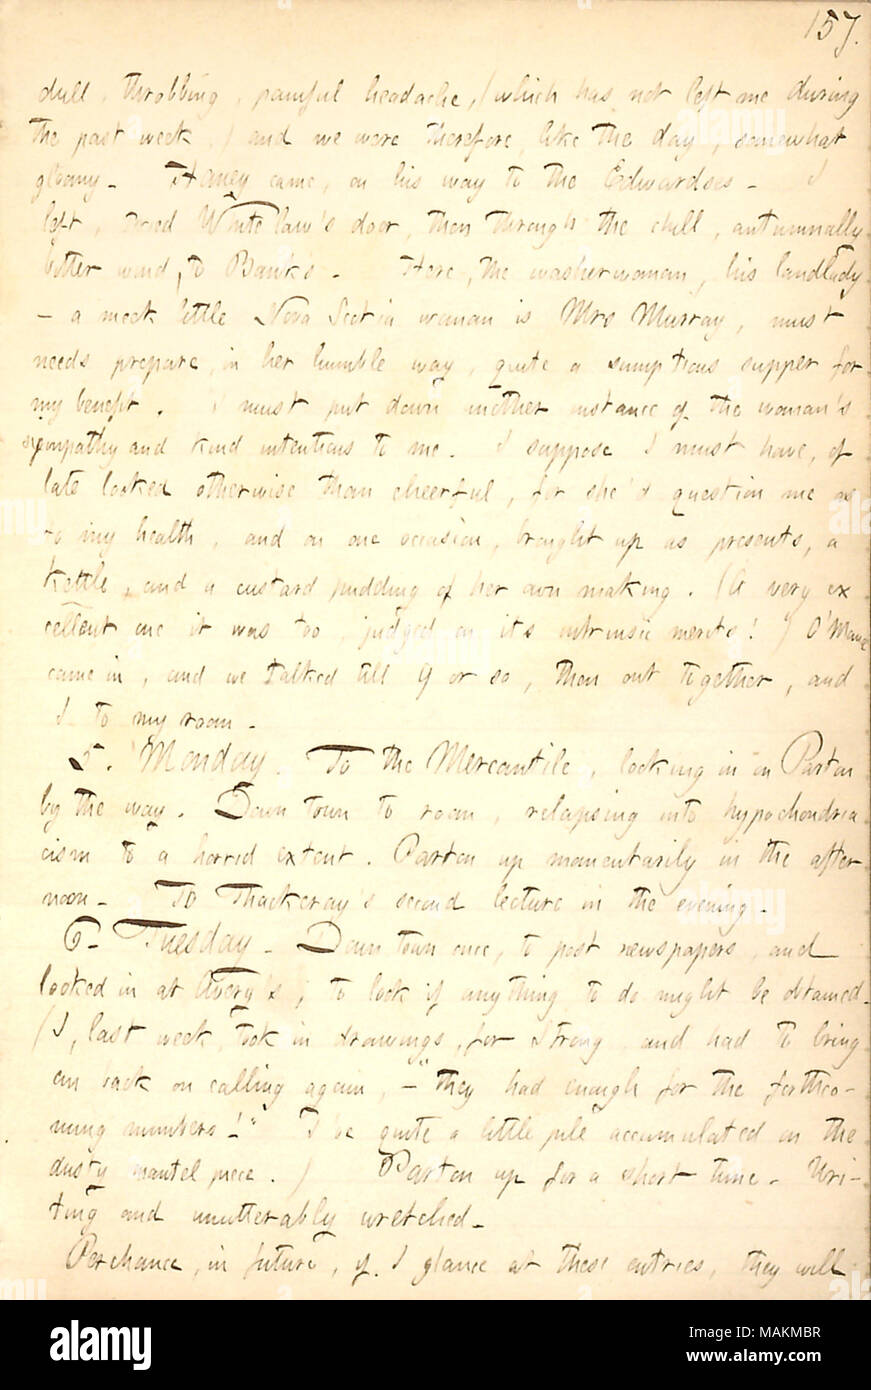 Regarding the kindness of landlady, Mrs. Murray.  Transcription: dull, throbbing, painful headache, (which has not left me during the past week,) and we were therefore, like the day, somewhat gloomy. [Jesse] Haney came, on his way to the Edwardses. I left, tried [Matthew] Whitelaw's door, then through the chill, autumnally bitter wind, to [A.F.] Bank's. Here, the washerwoman, his landlady  ? a meek little Nova Scotia woman is Mrs Murray, must needs prepare, in her humble way, quite a sumptuous supper for my benefit. I must put down another instance of the woman's sympathy and kind intentions t Stock Photo